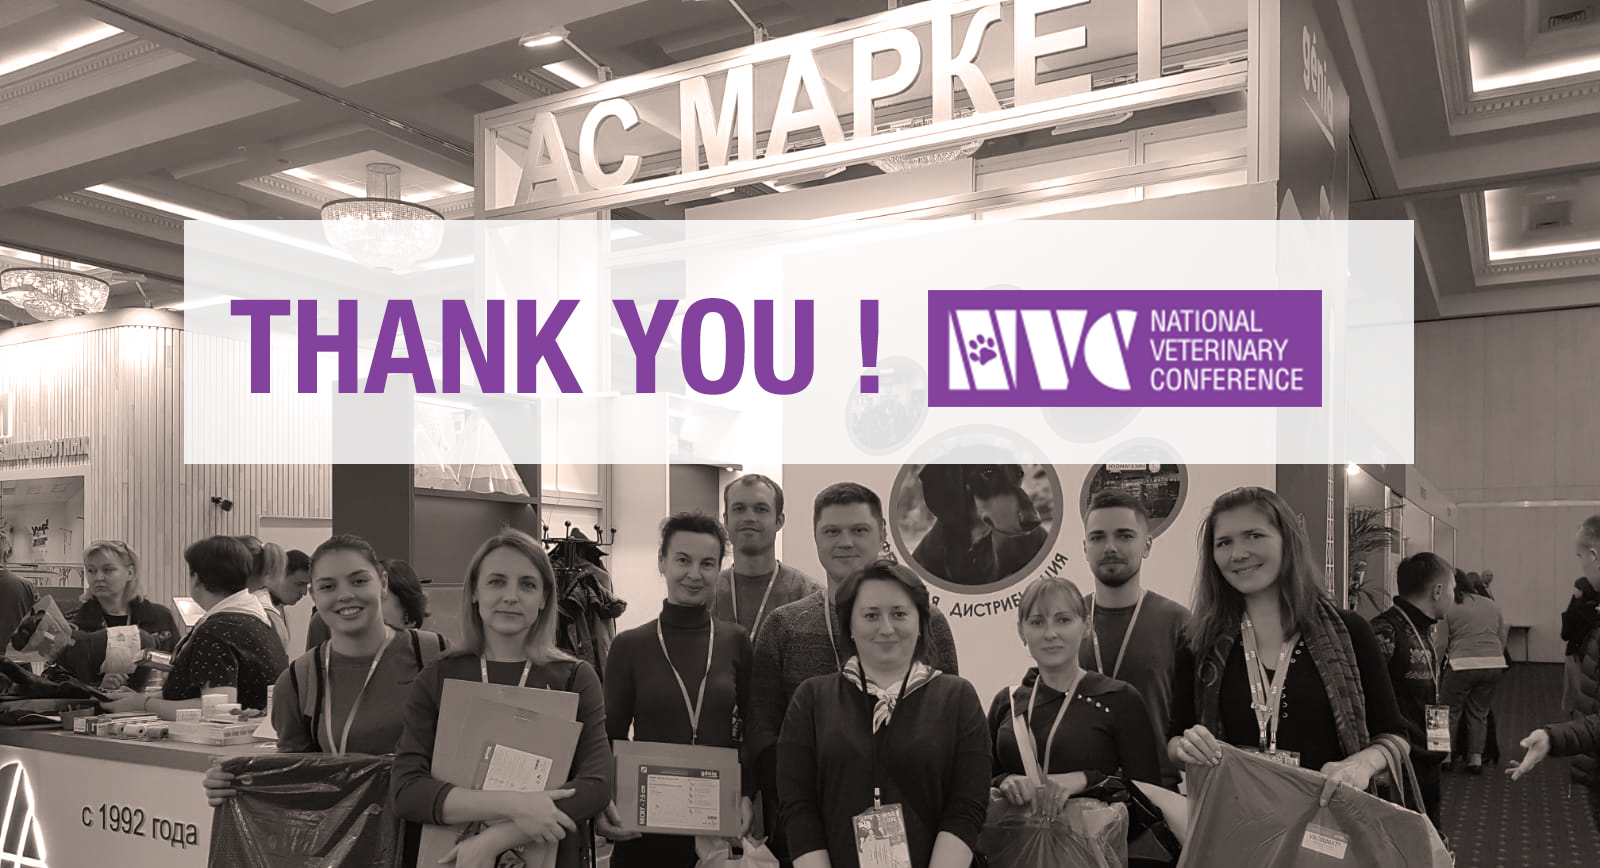 Thanks you to come to the NVC 2019!